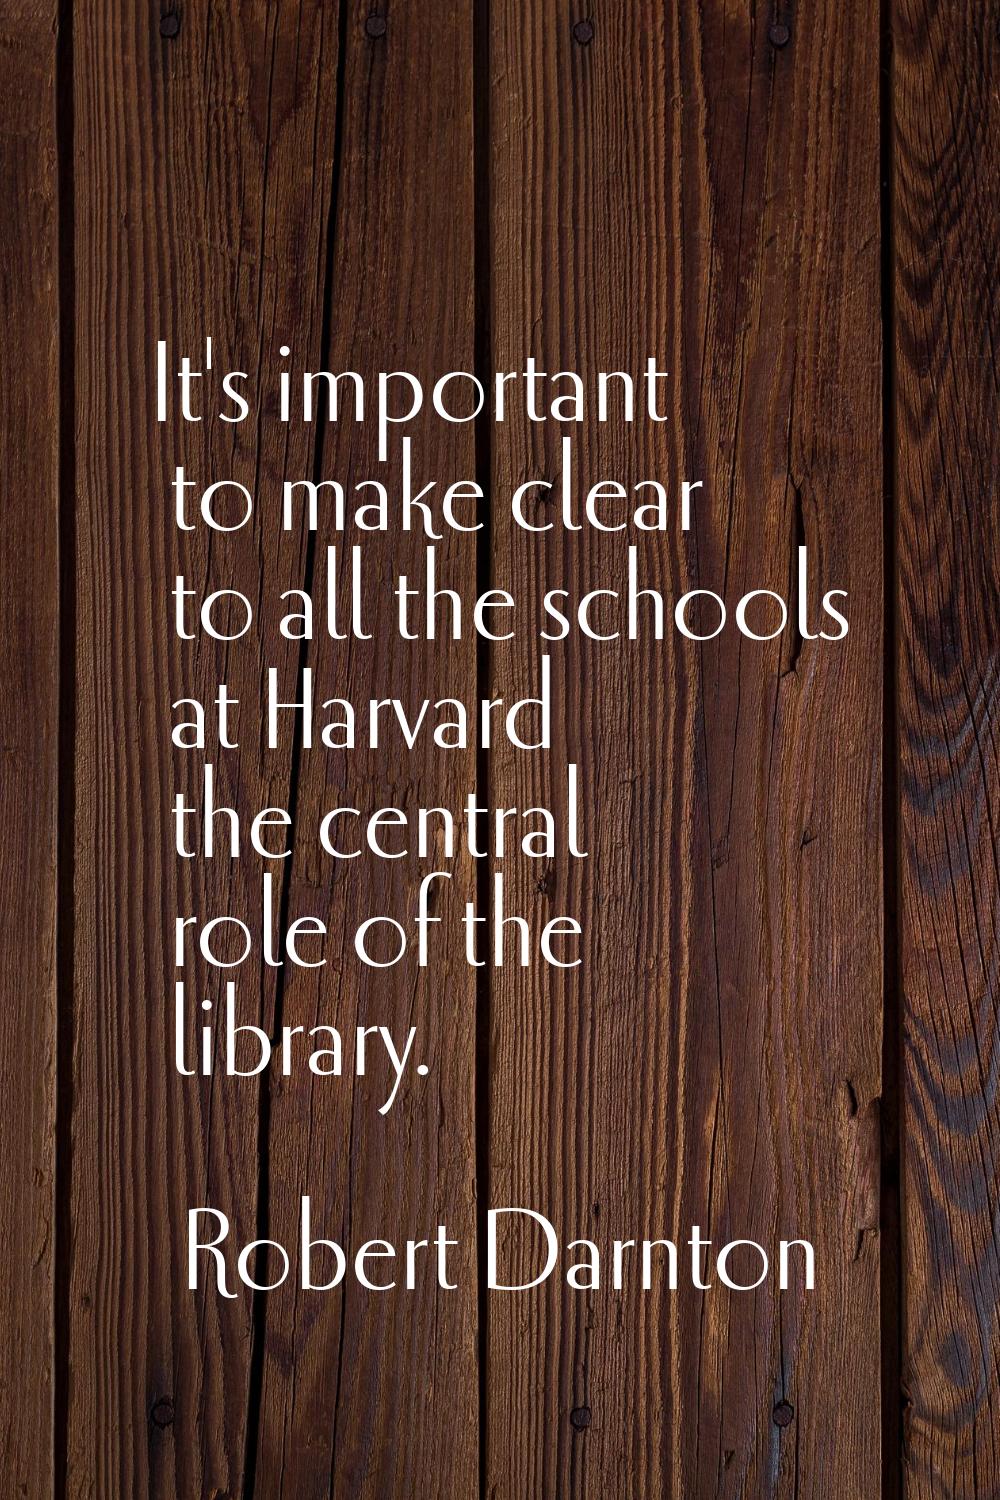 It's important to make clear to all the schools at Harvard the central role of the library.